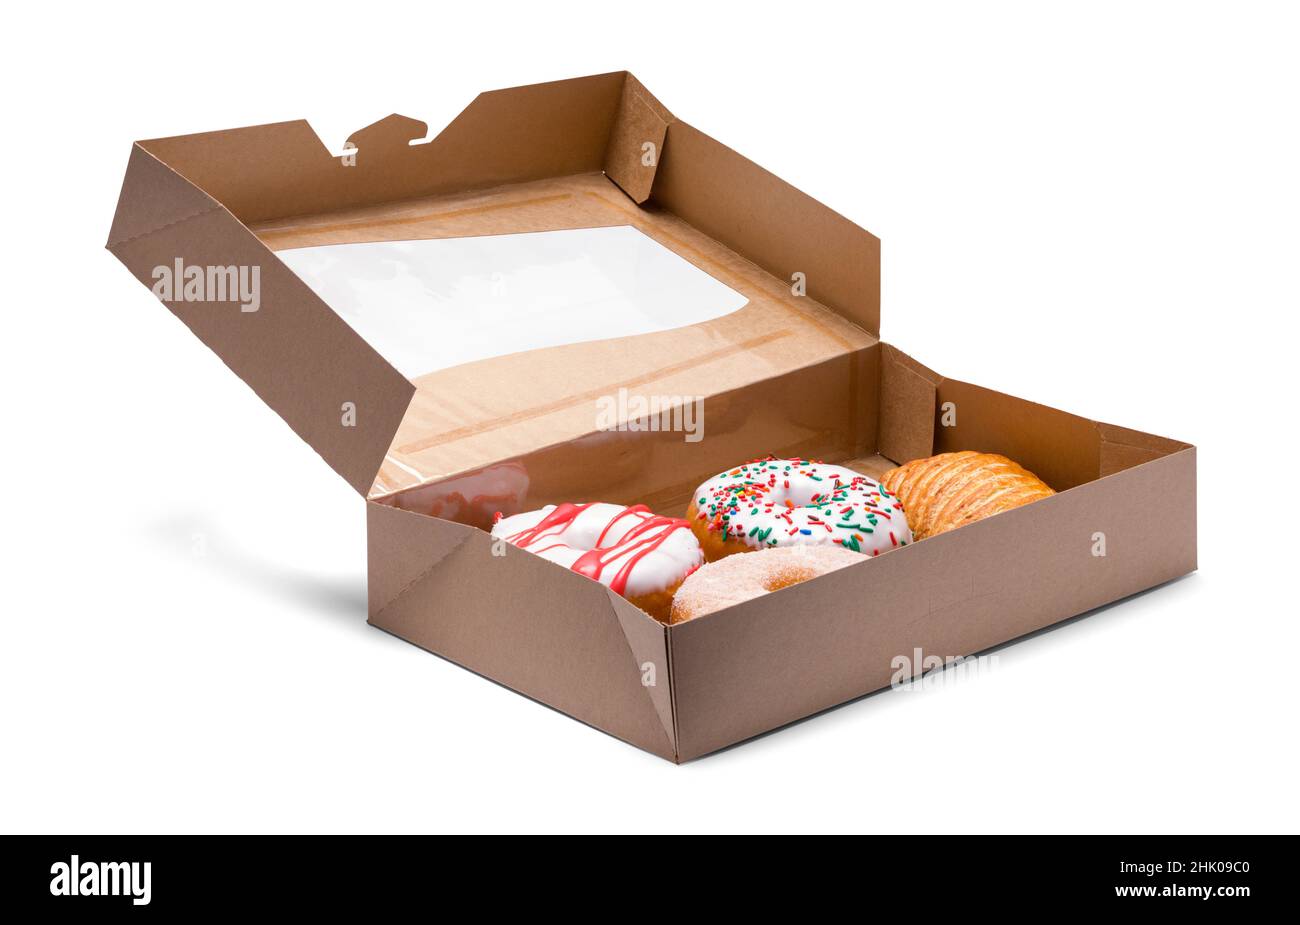 Various Glazed and Frosted Doughnuts in a Box. Stock Photo